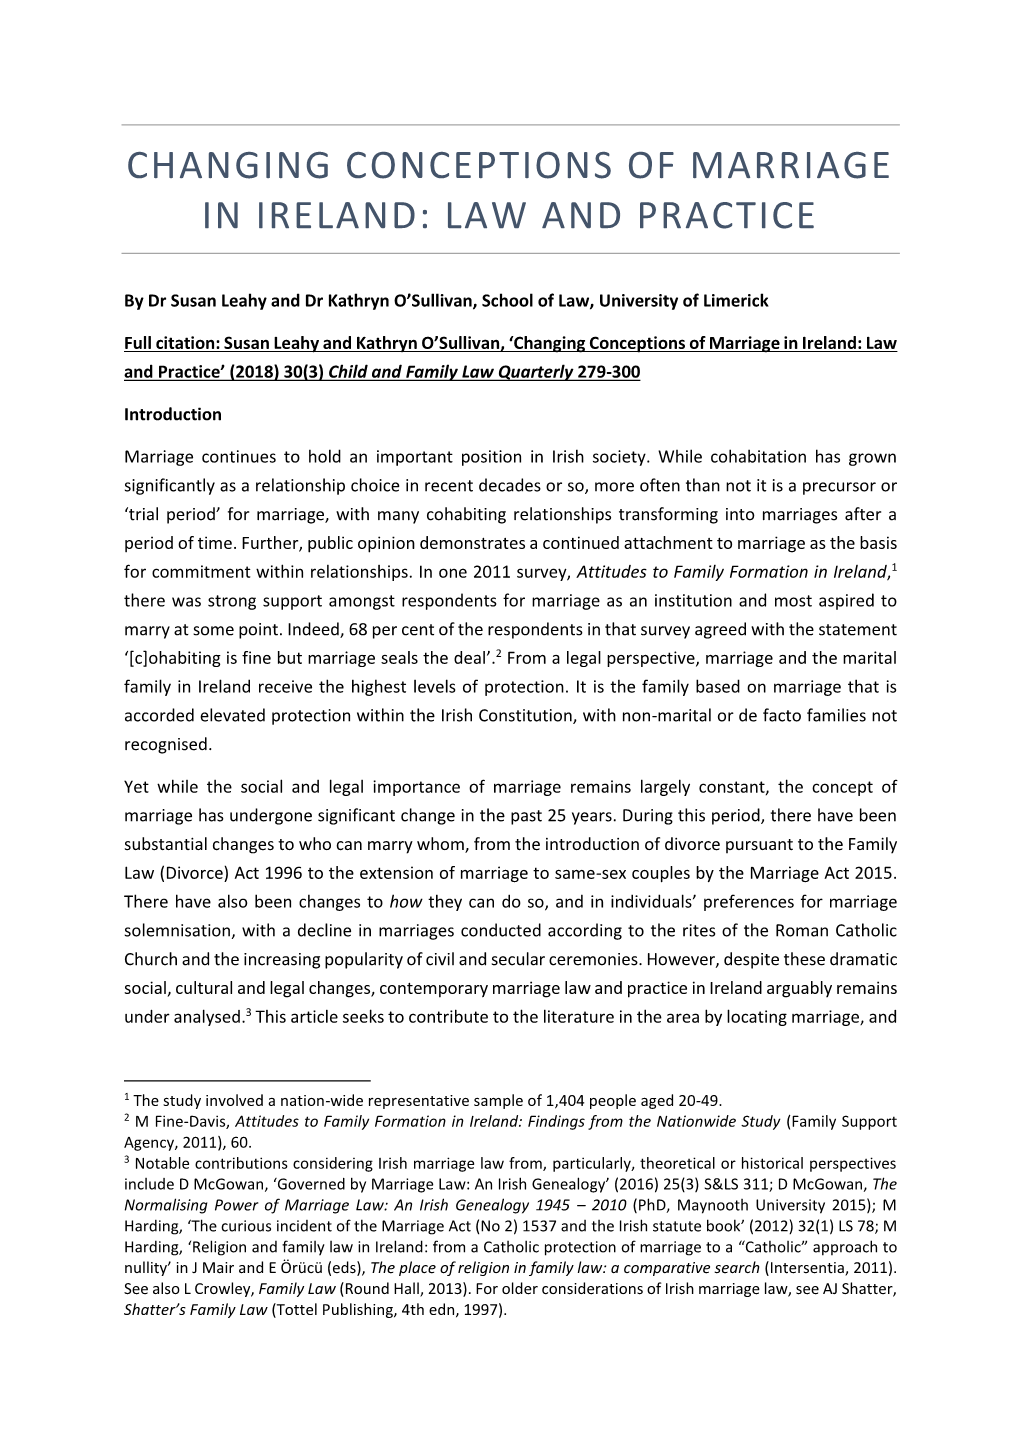 Changing Conceptions of Marriage in Ireland: Law and Practice